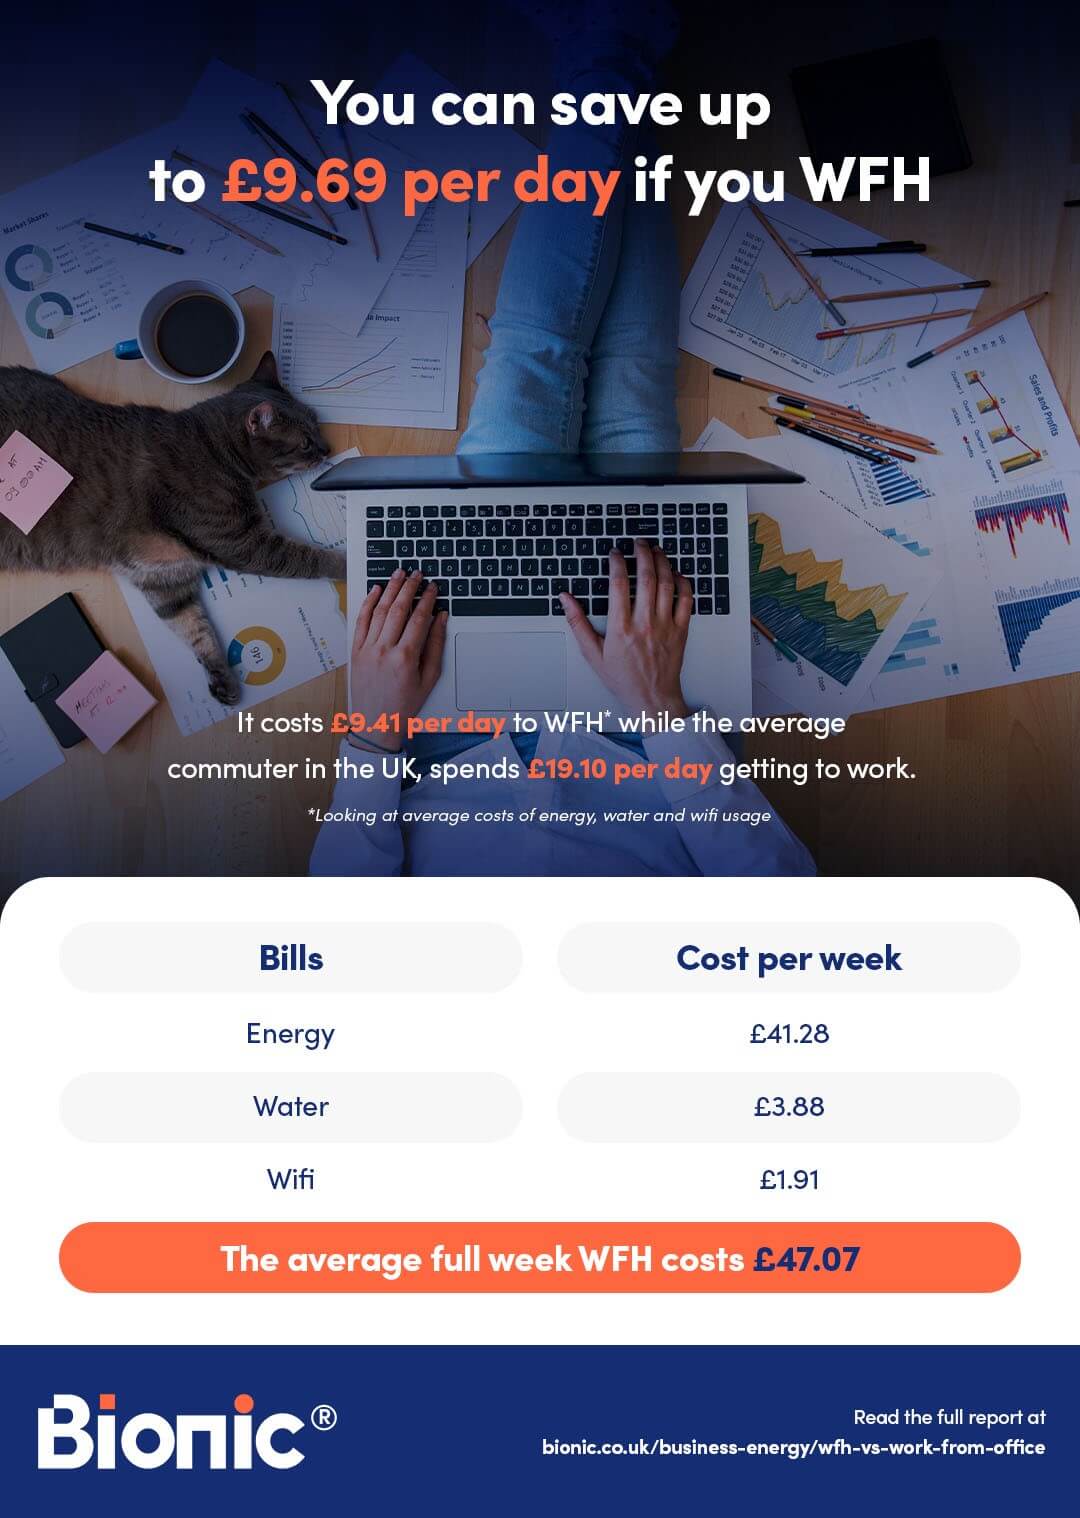 Infographic displaying how much it costs to use energy, water and wifi with working from home, with the average full week costing £47.07, saving up to £9.69.